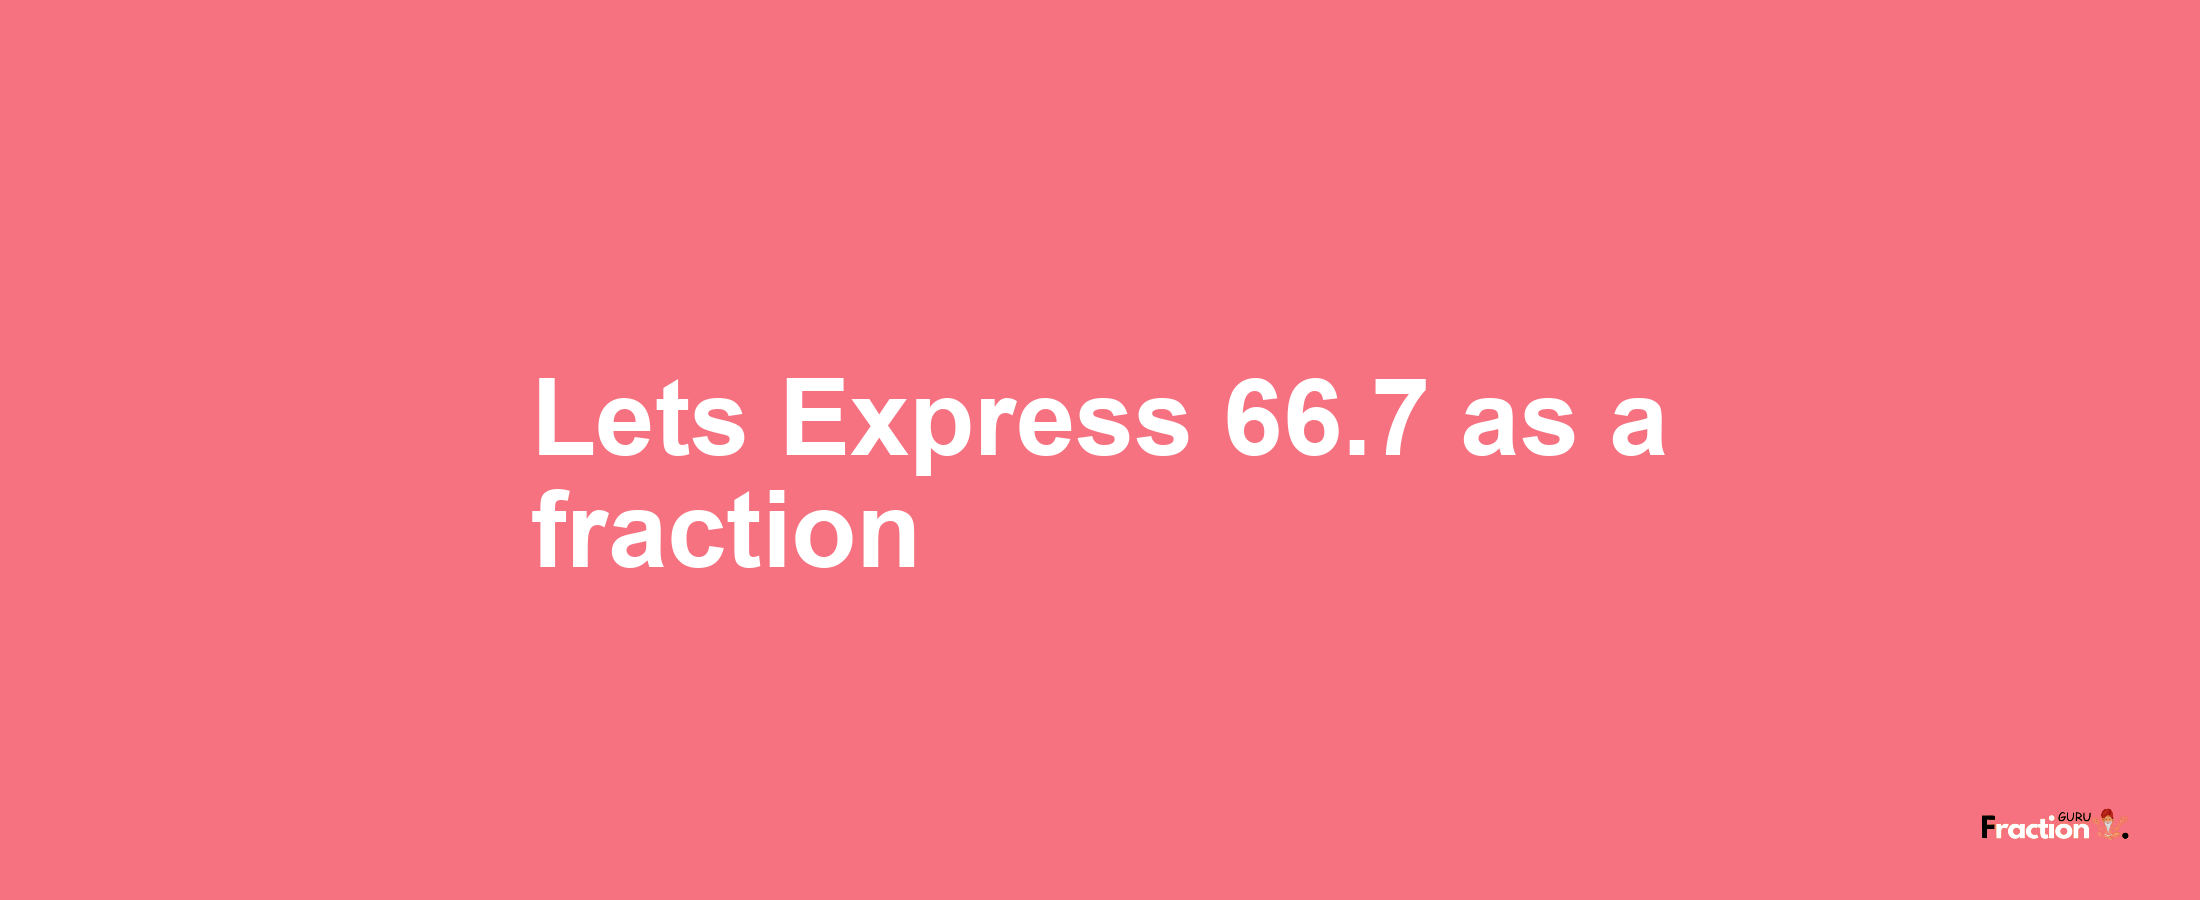 Lets Express 66.7 as afraction